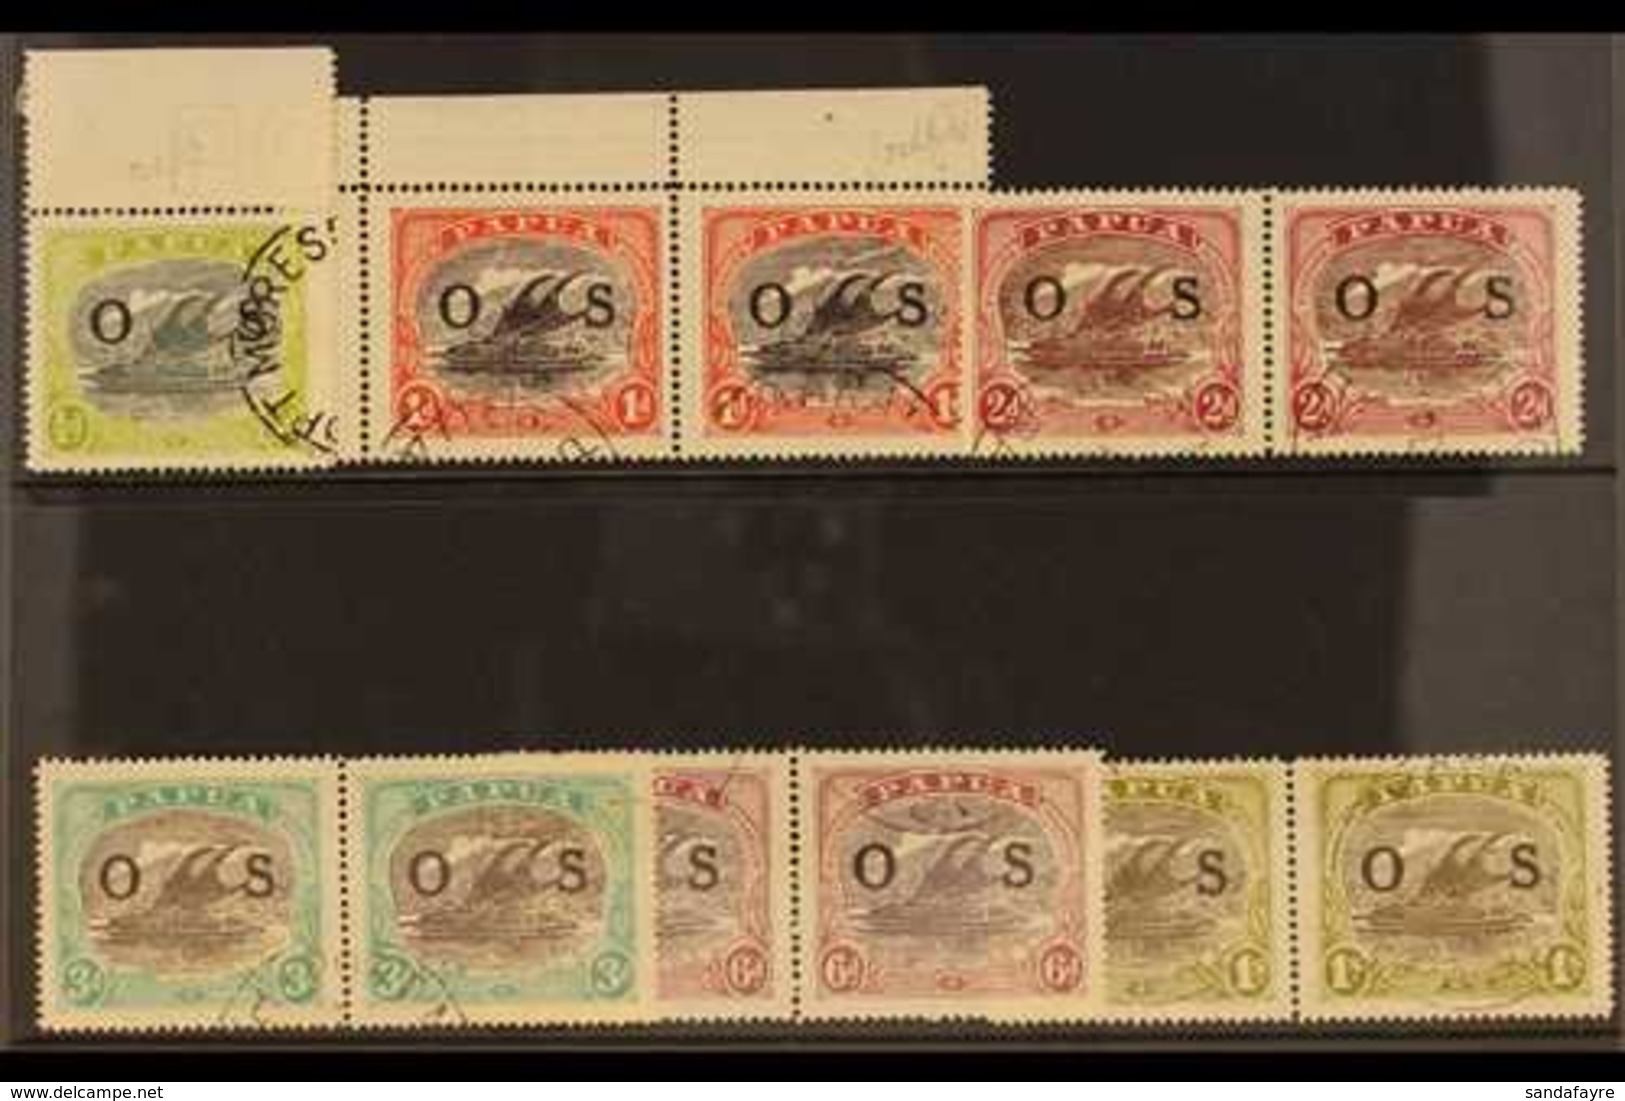 OFFICIALS WITH "RIFT IN CLOUD" FLAW 1931-32. VARIETIES. An "O S" Overprinted Fine Used Range Bearing "RIFT IN CLOUD"  Va - Papua-Neuguinea